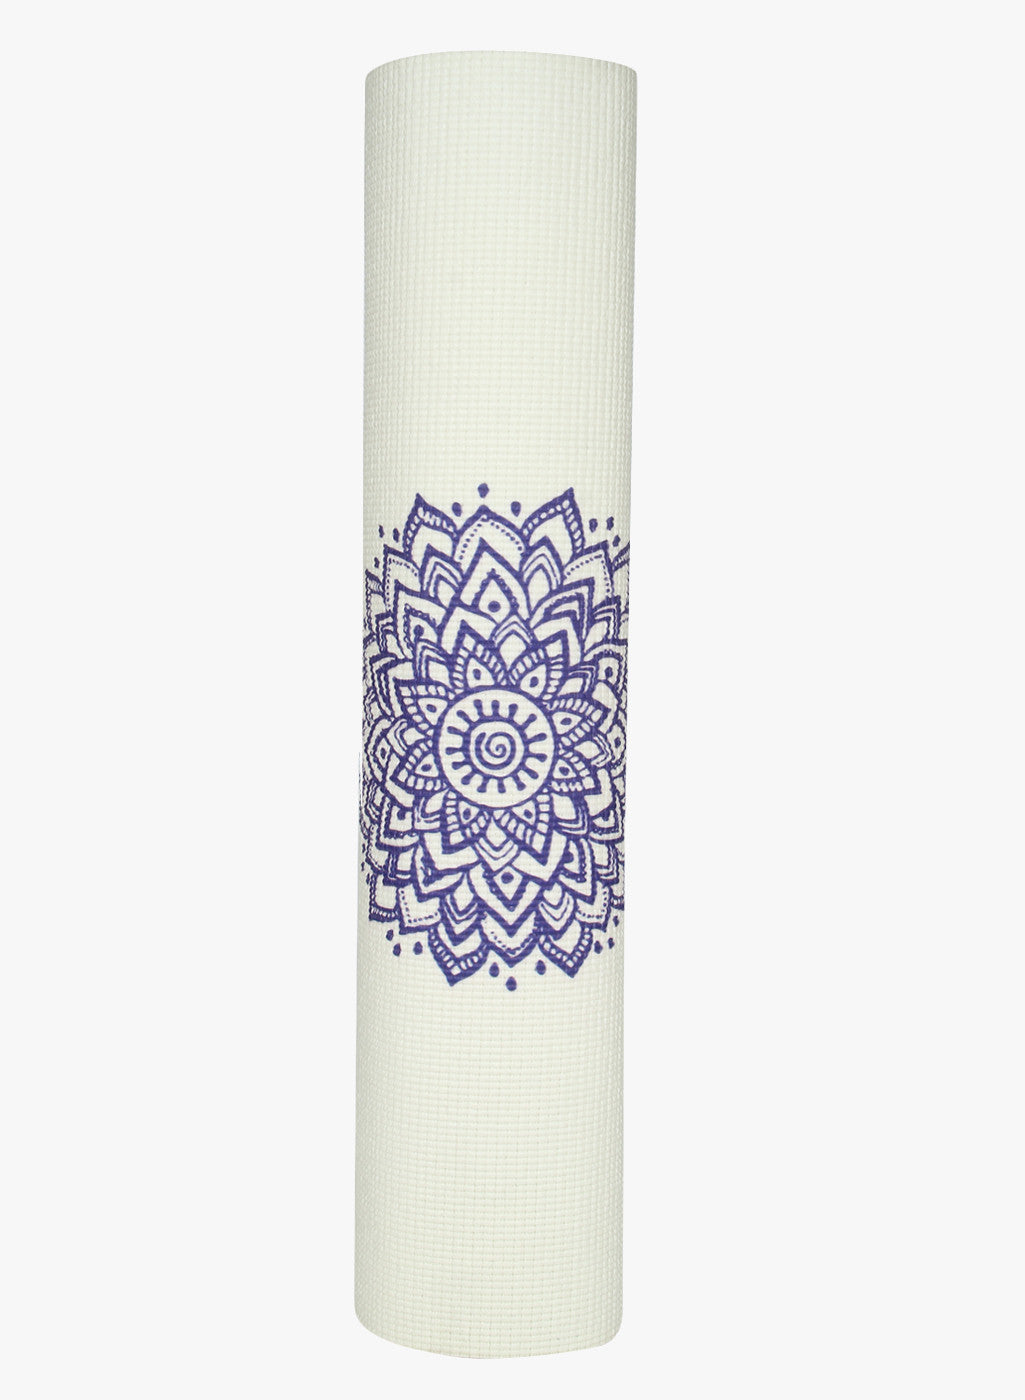 Spiritual Warrior's eco-friendly yoga mats have great grip, anti-slip, good cushioning for the knees, high quality, portable, affordable with Chakra print